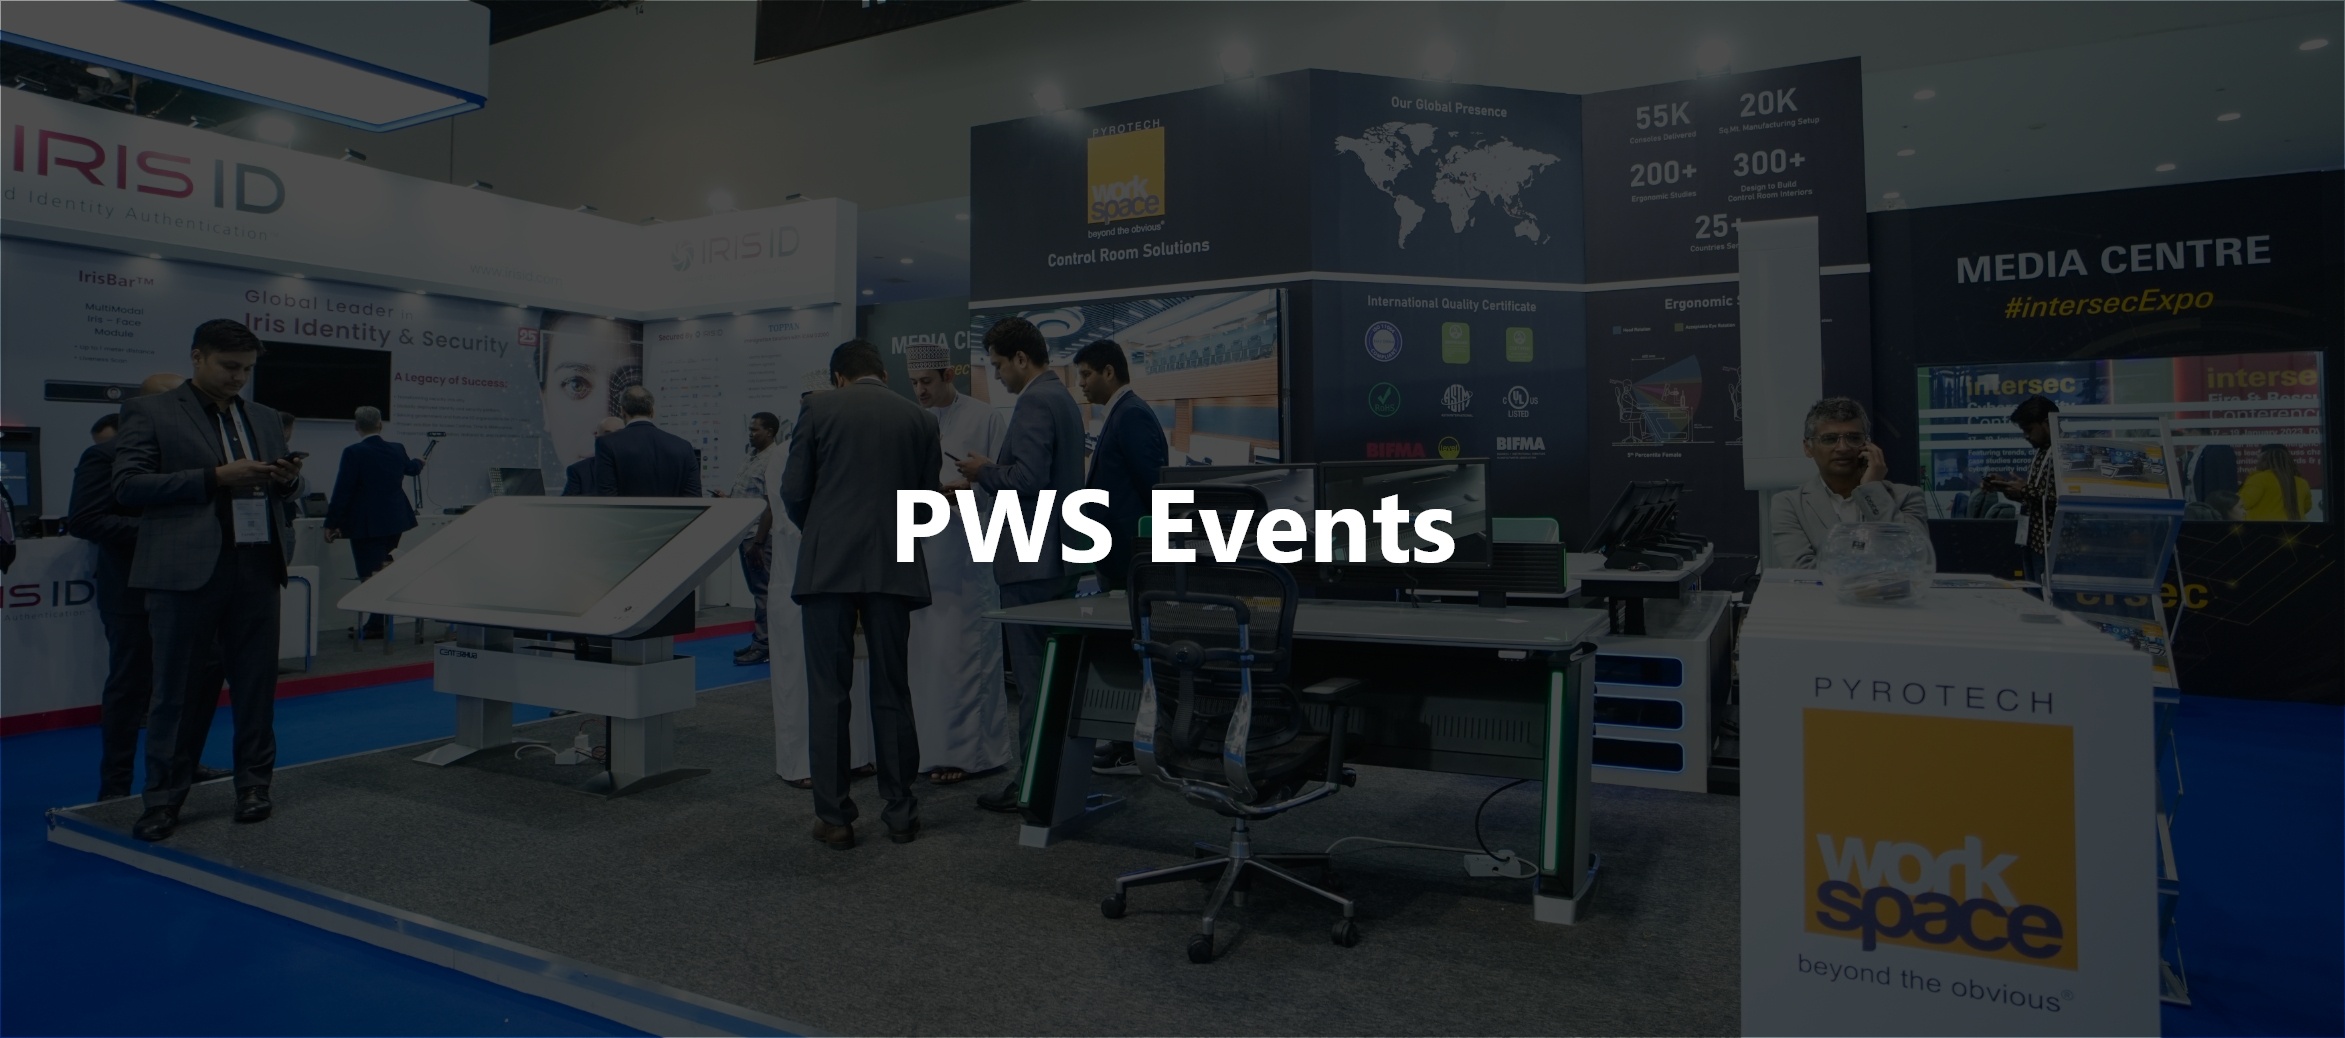 PWS events